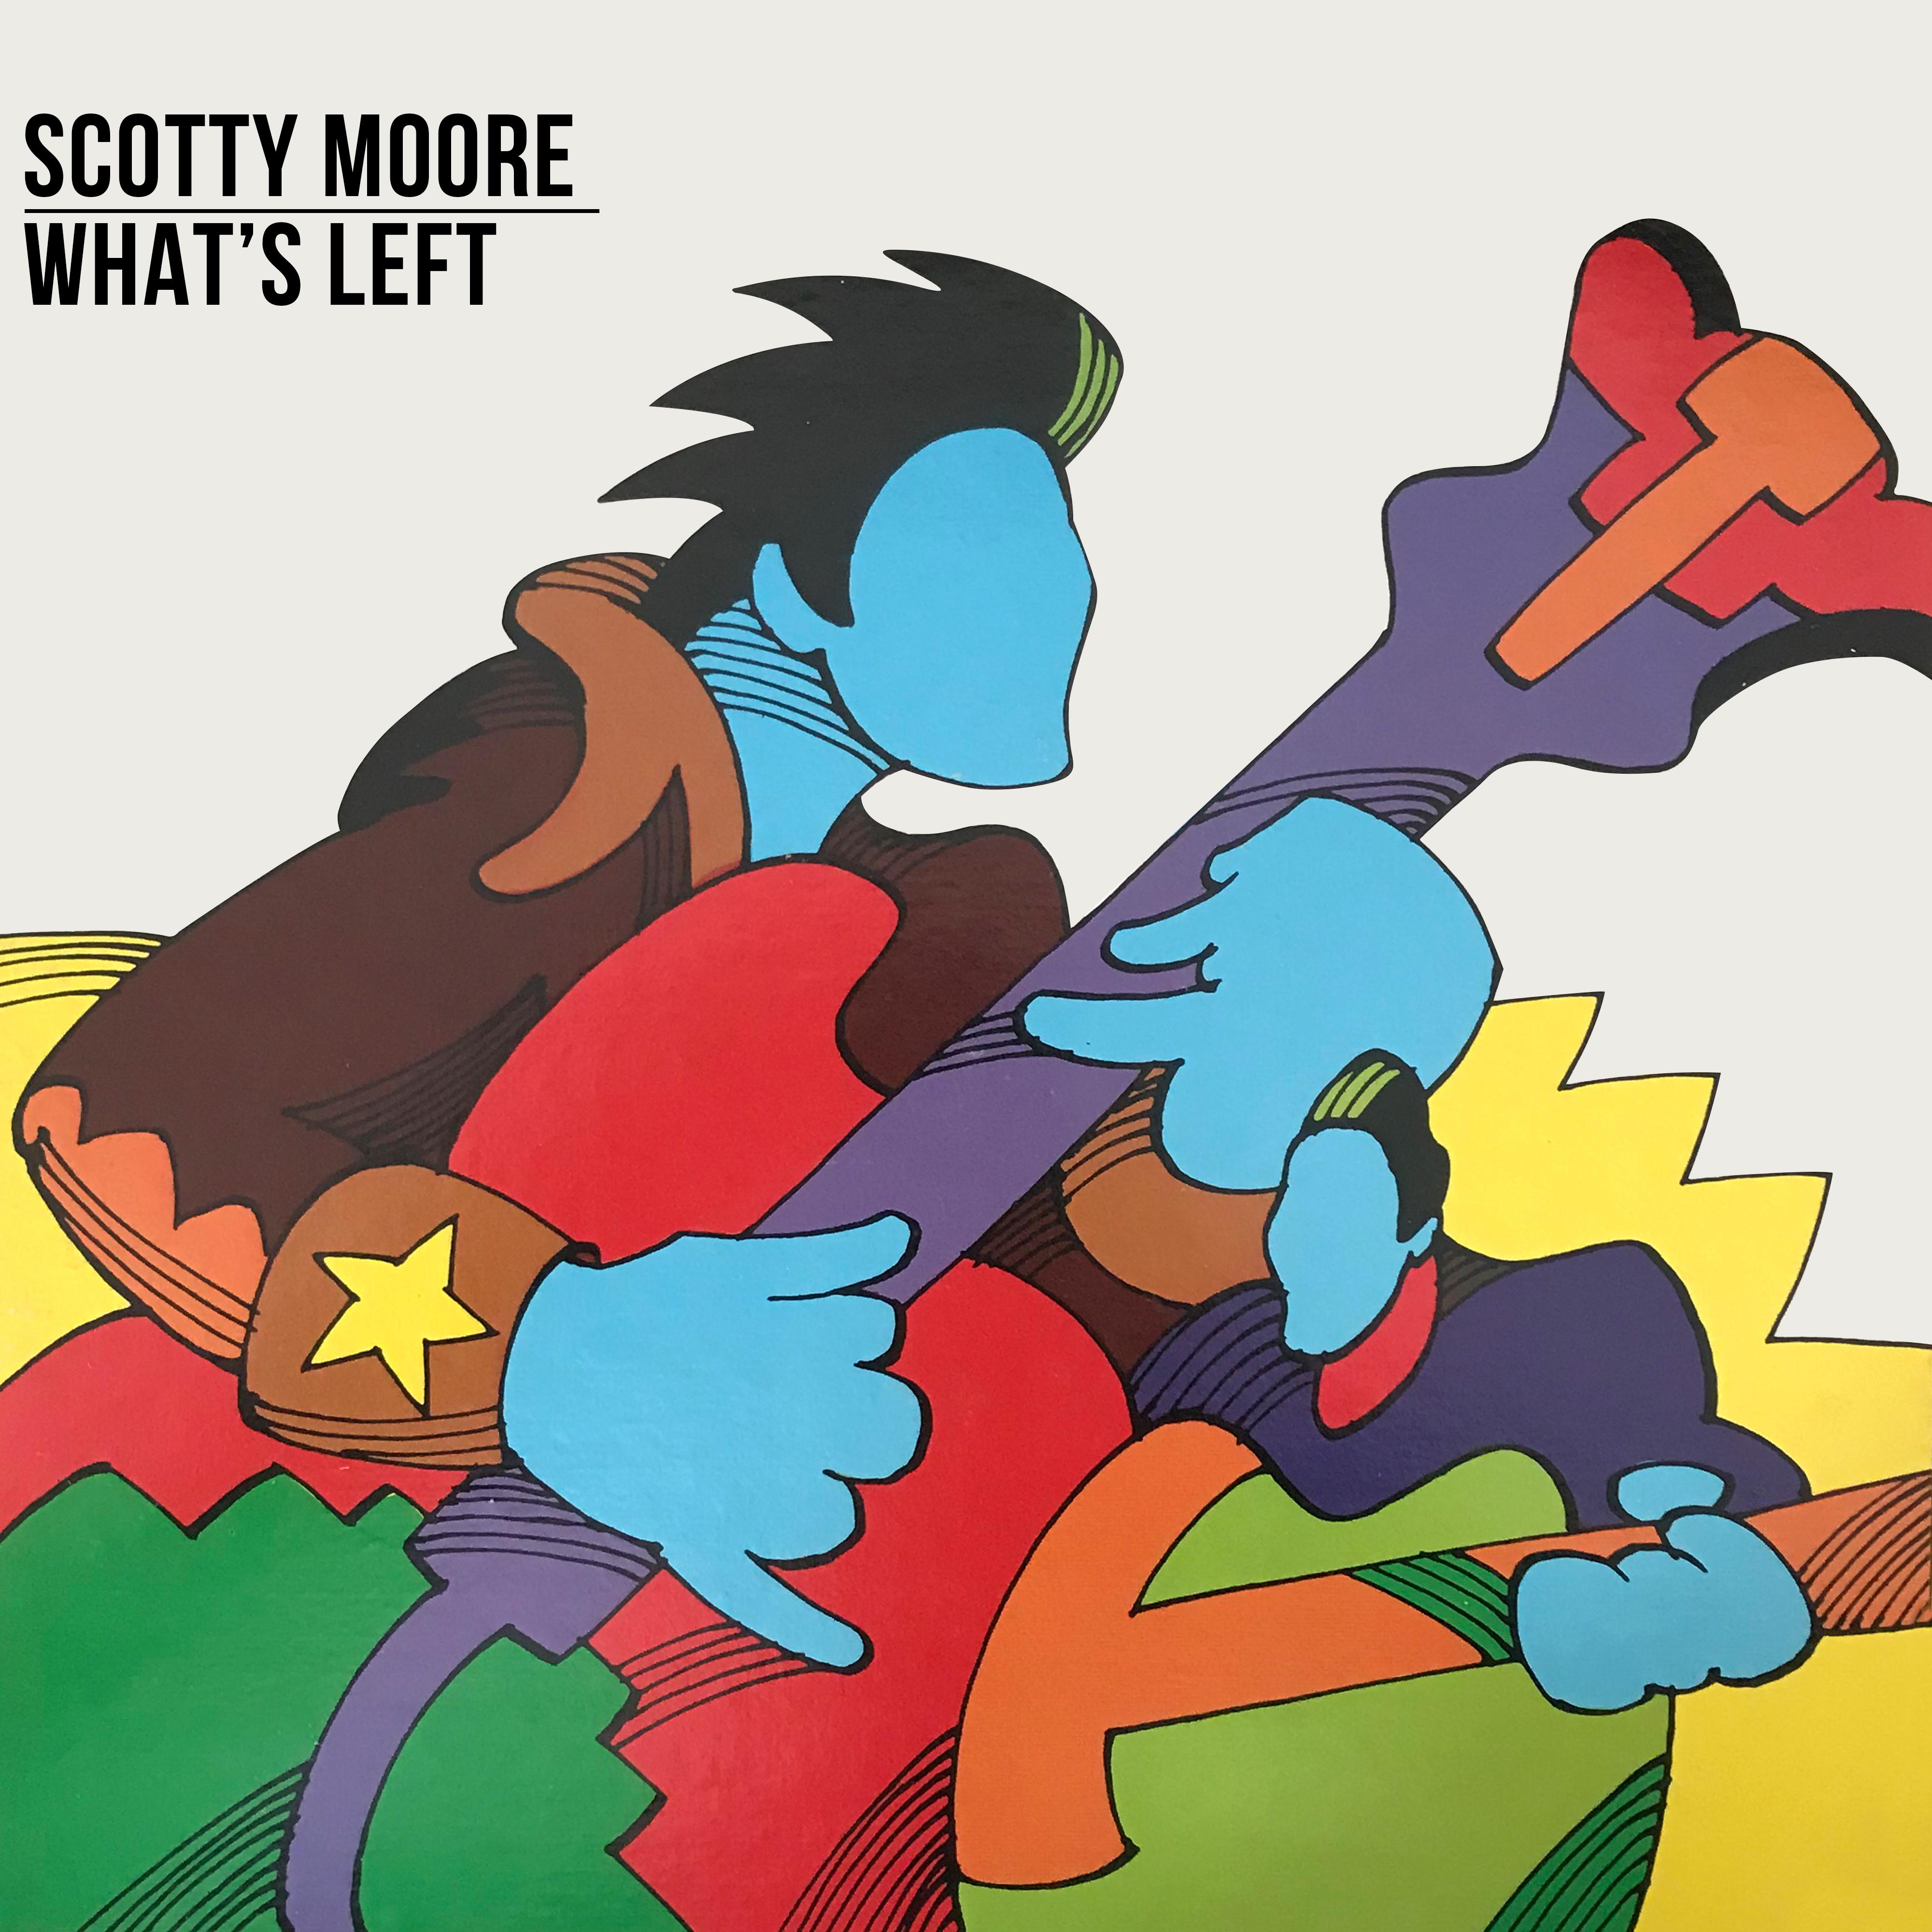 Scotty Moore - Introduction